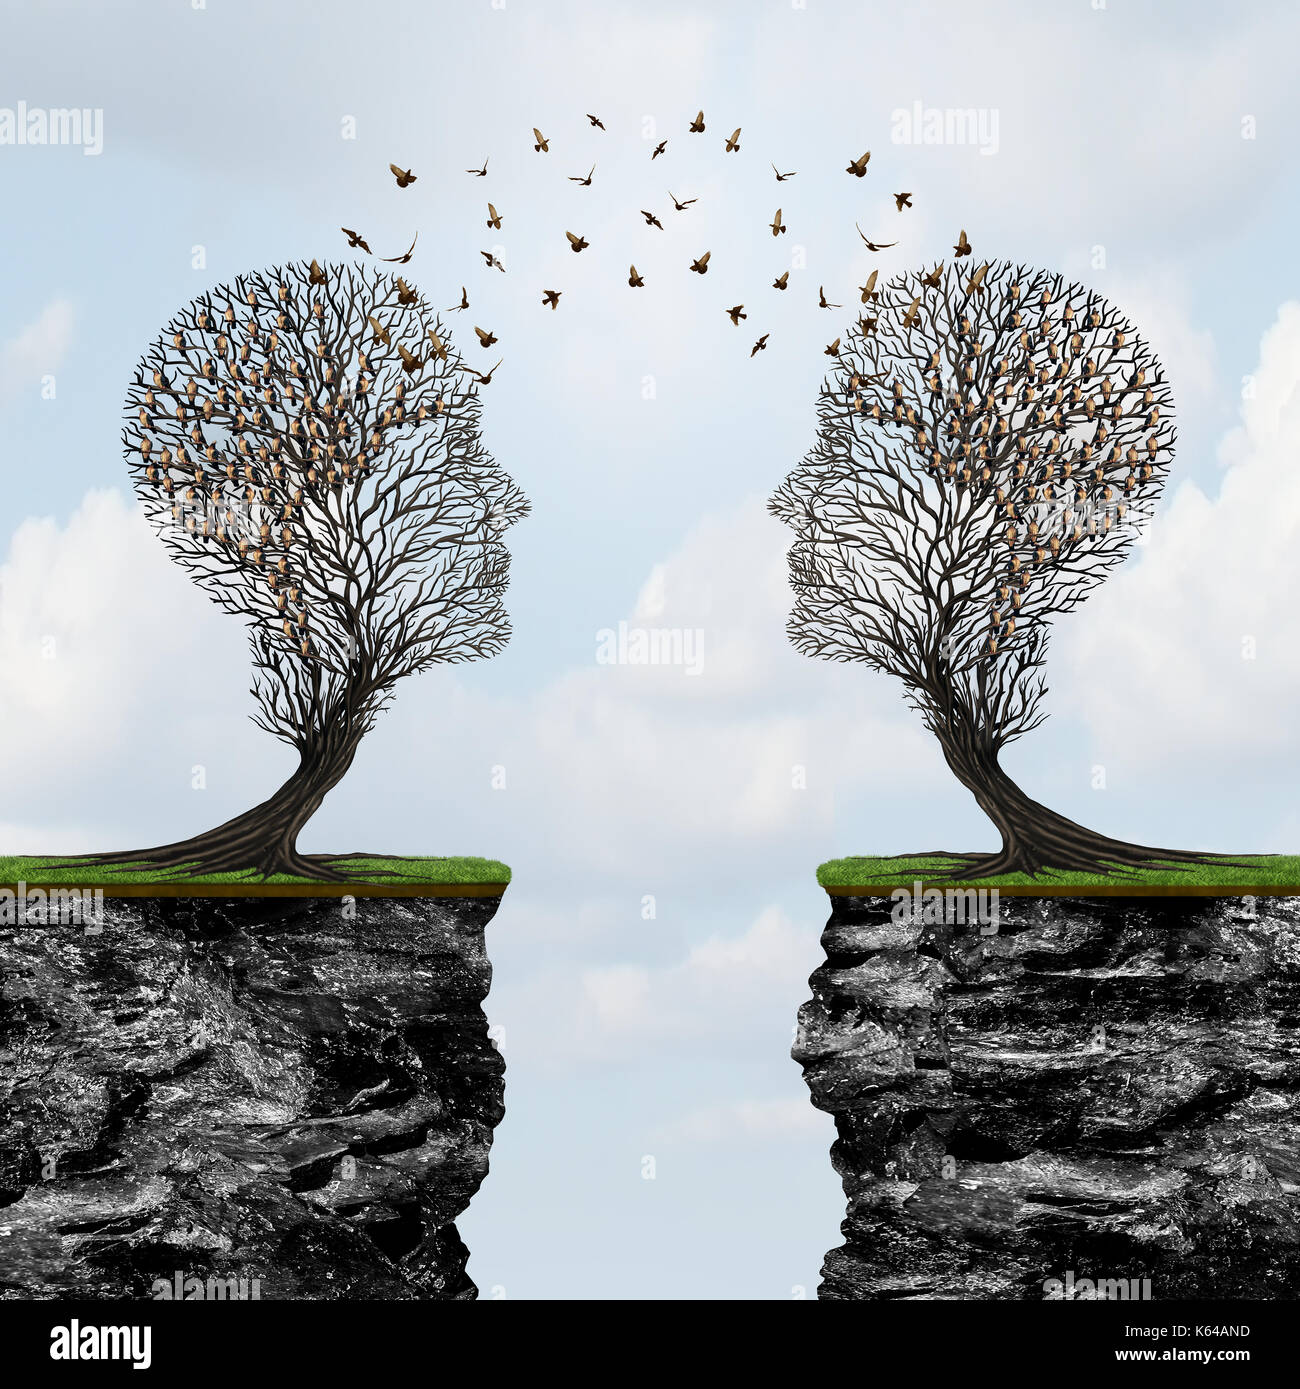 Communicating from distance as two trees shaped as a human head with birds in transit across cliffs as a business metaphor for commerce reach. Stock Photo